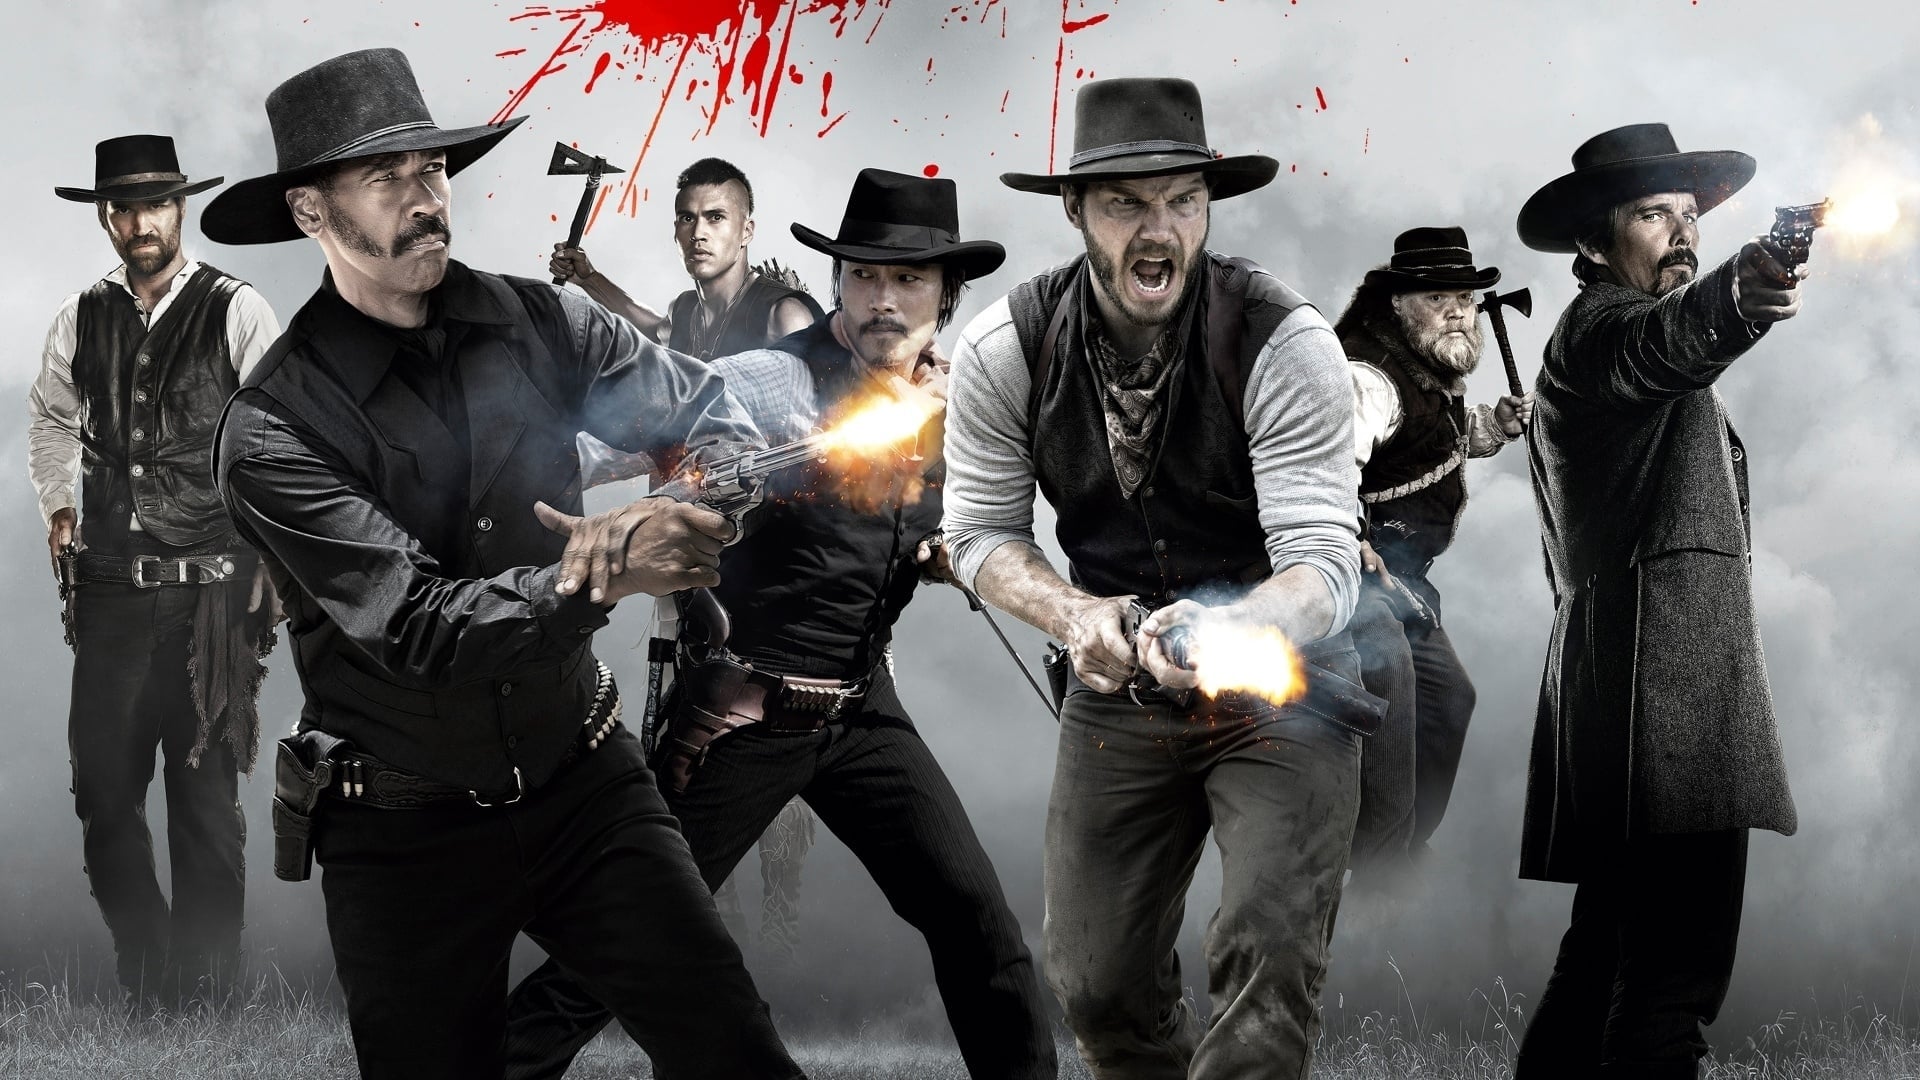 Poster Phim Bảy Tay Súng Huyền Thoại (The Magnificent Seven)